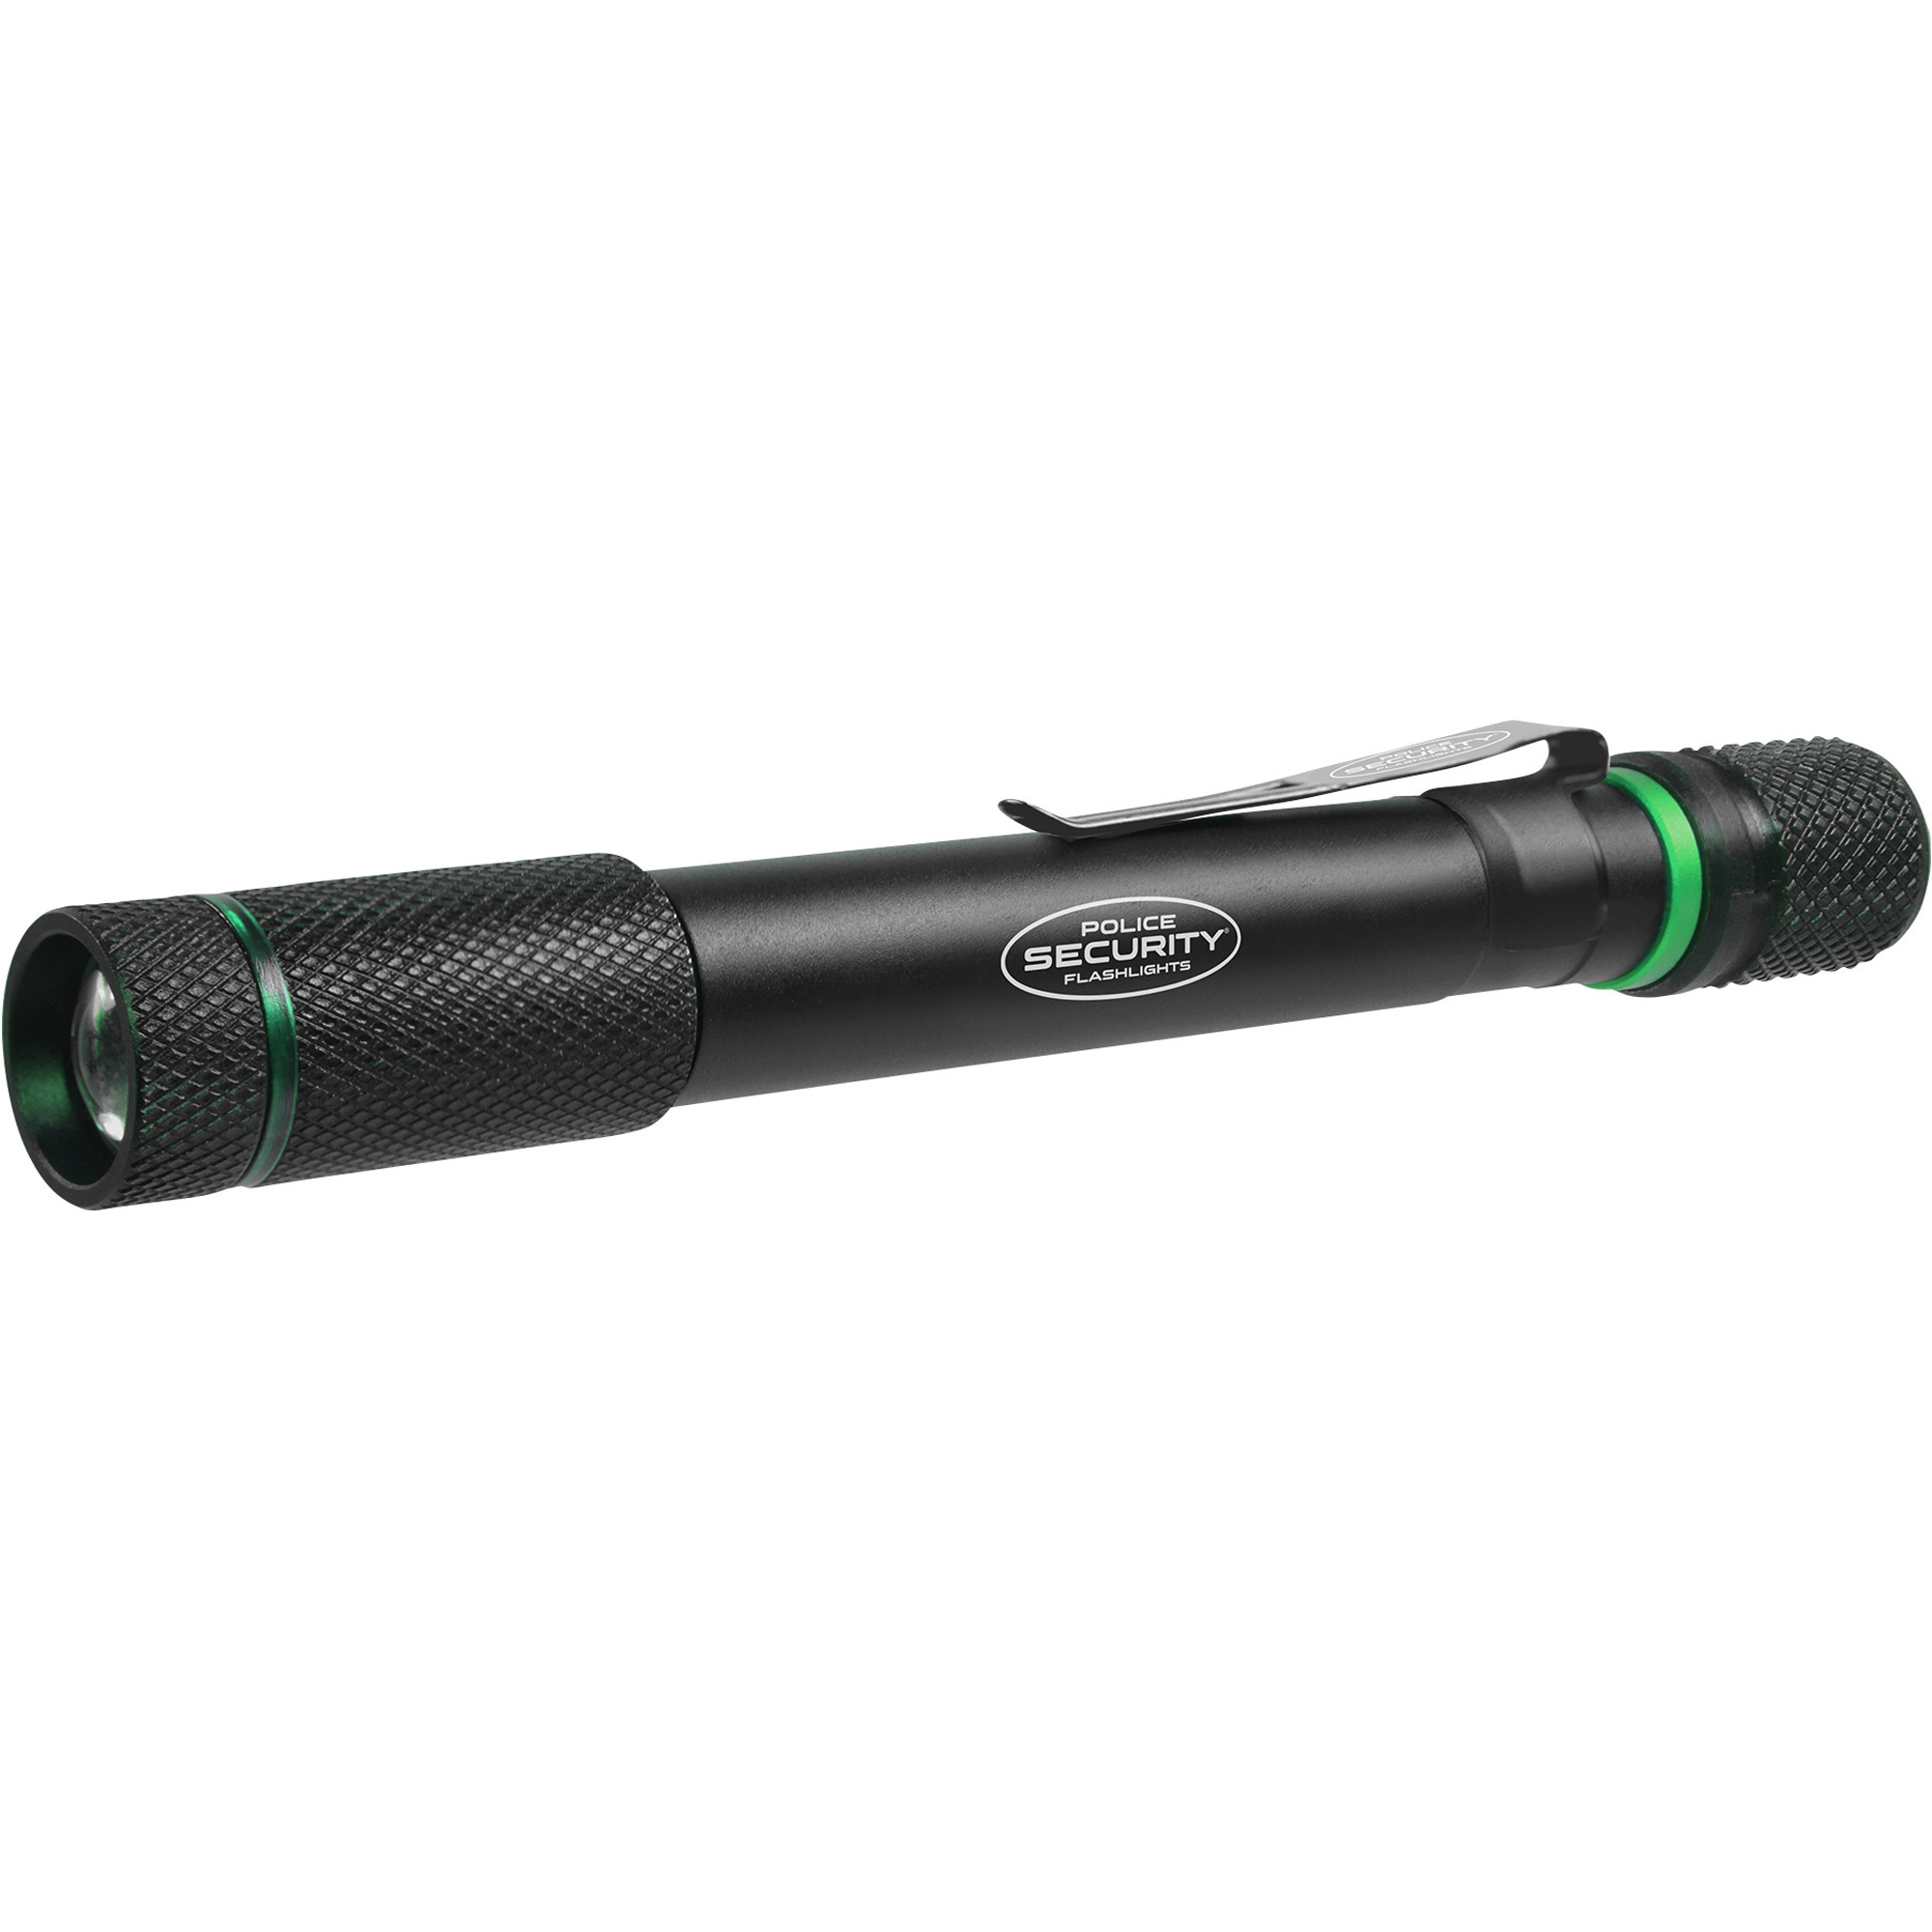 Police Security Aura-R LED Rechargeable Flashlight, 280 Lumens, Model 98542